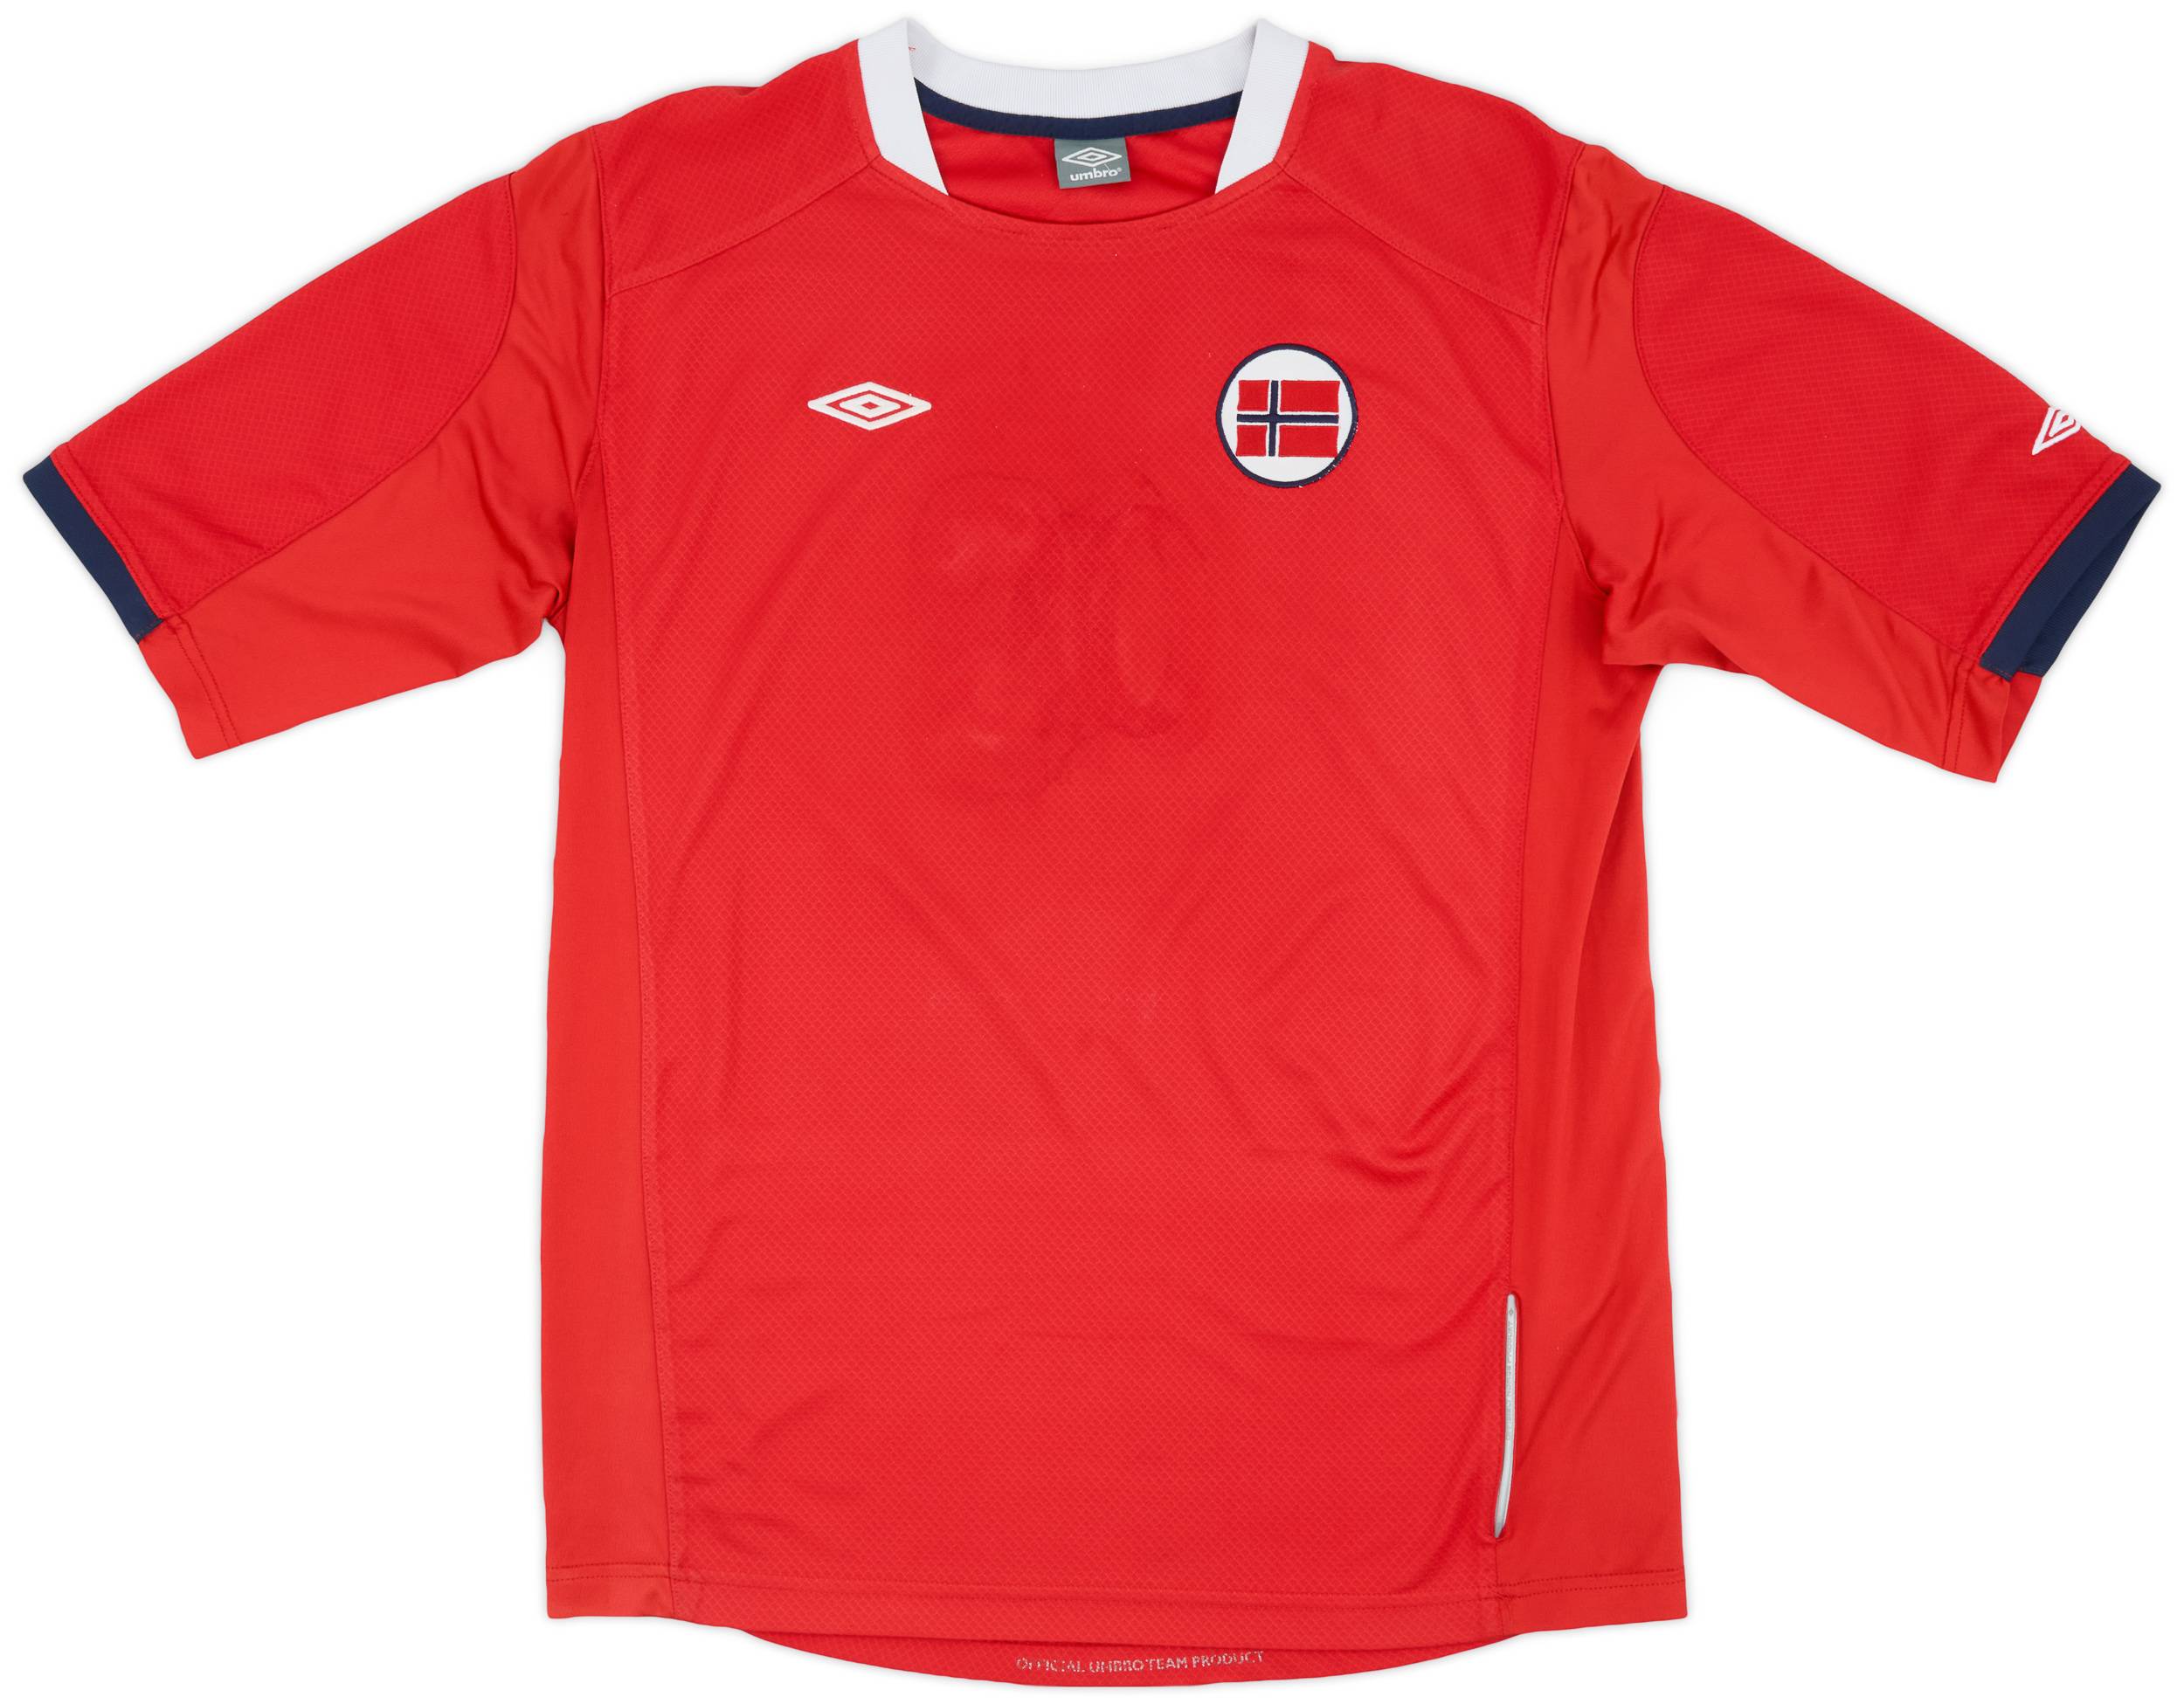 2010-11 Norway Home Shirt - 4/10 - (L)